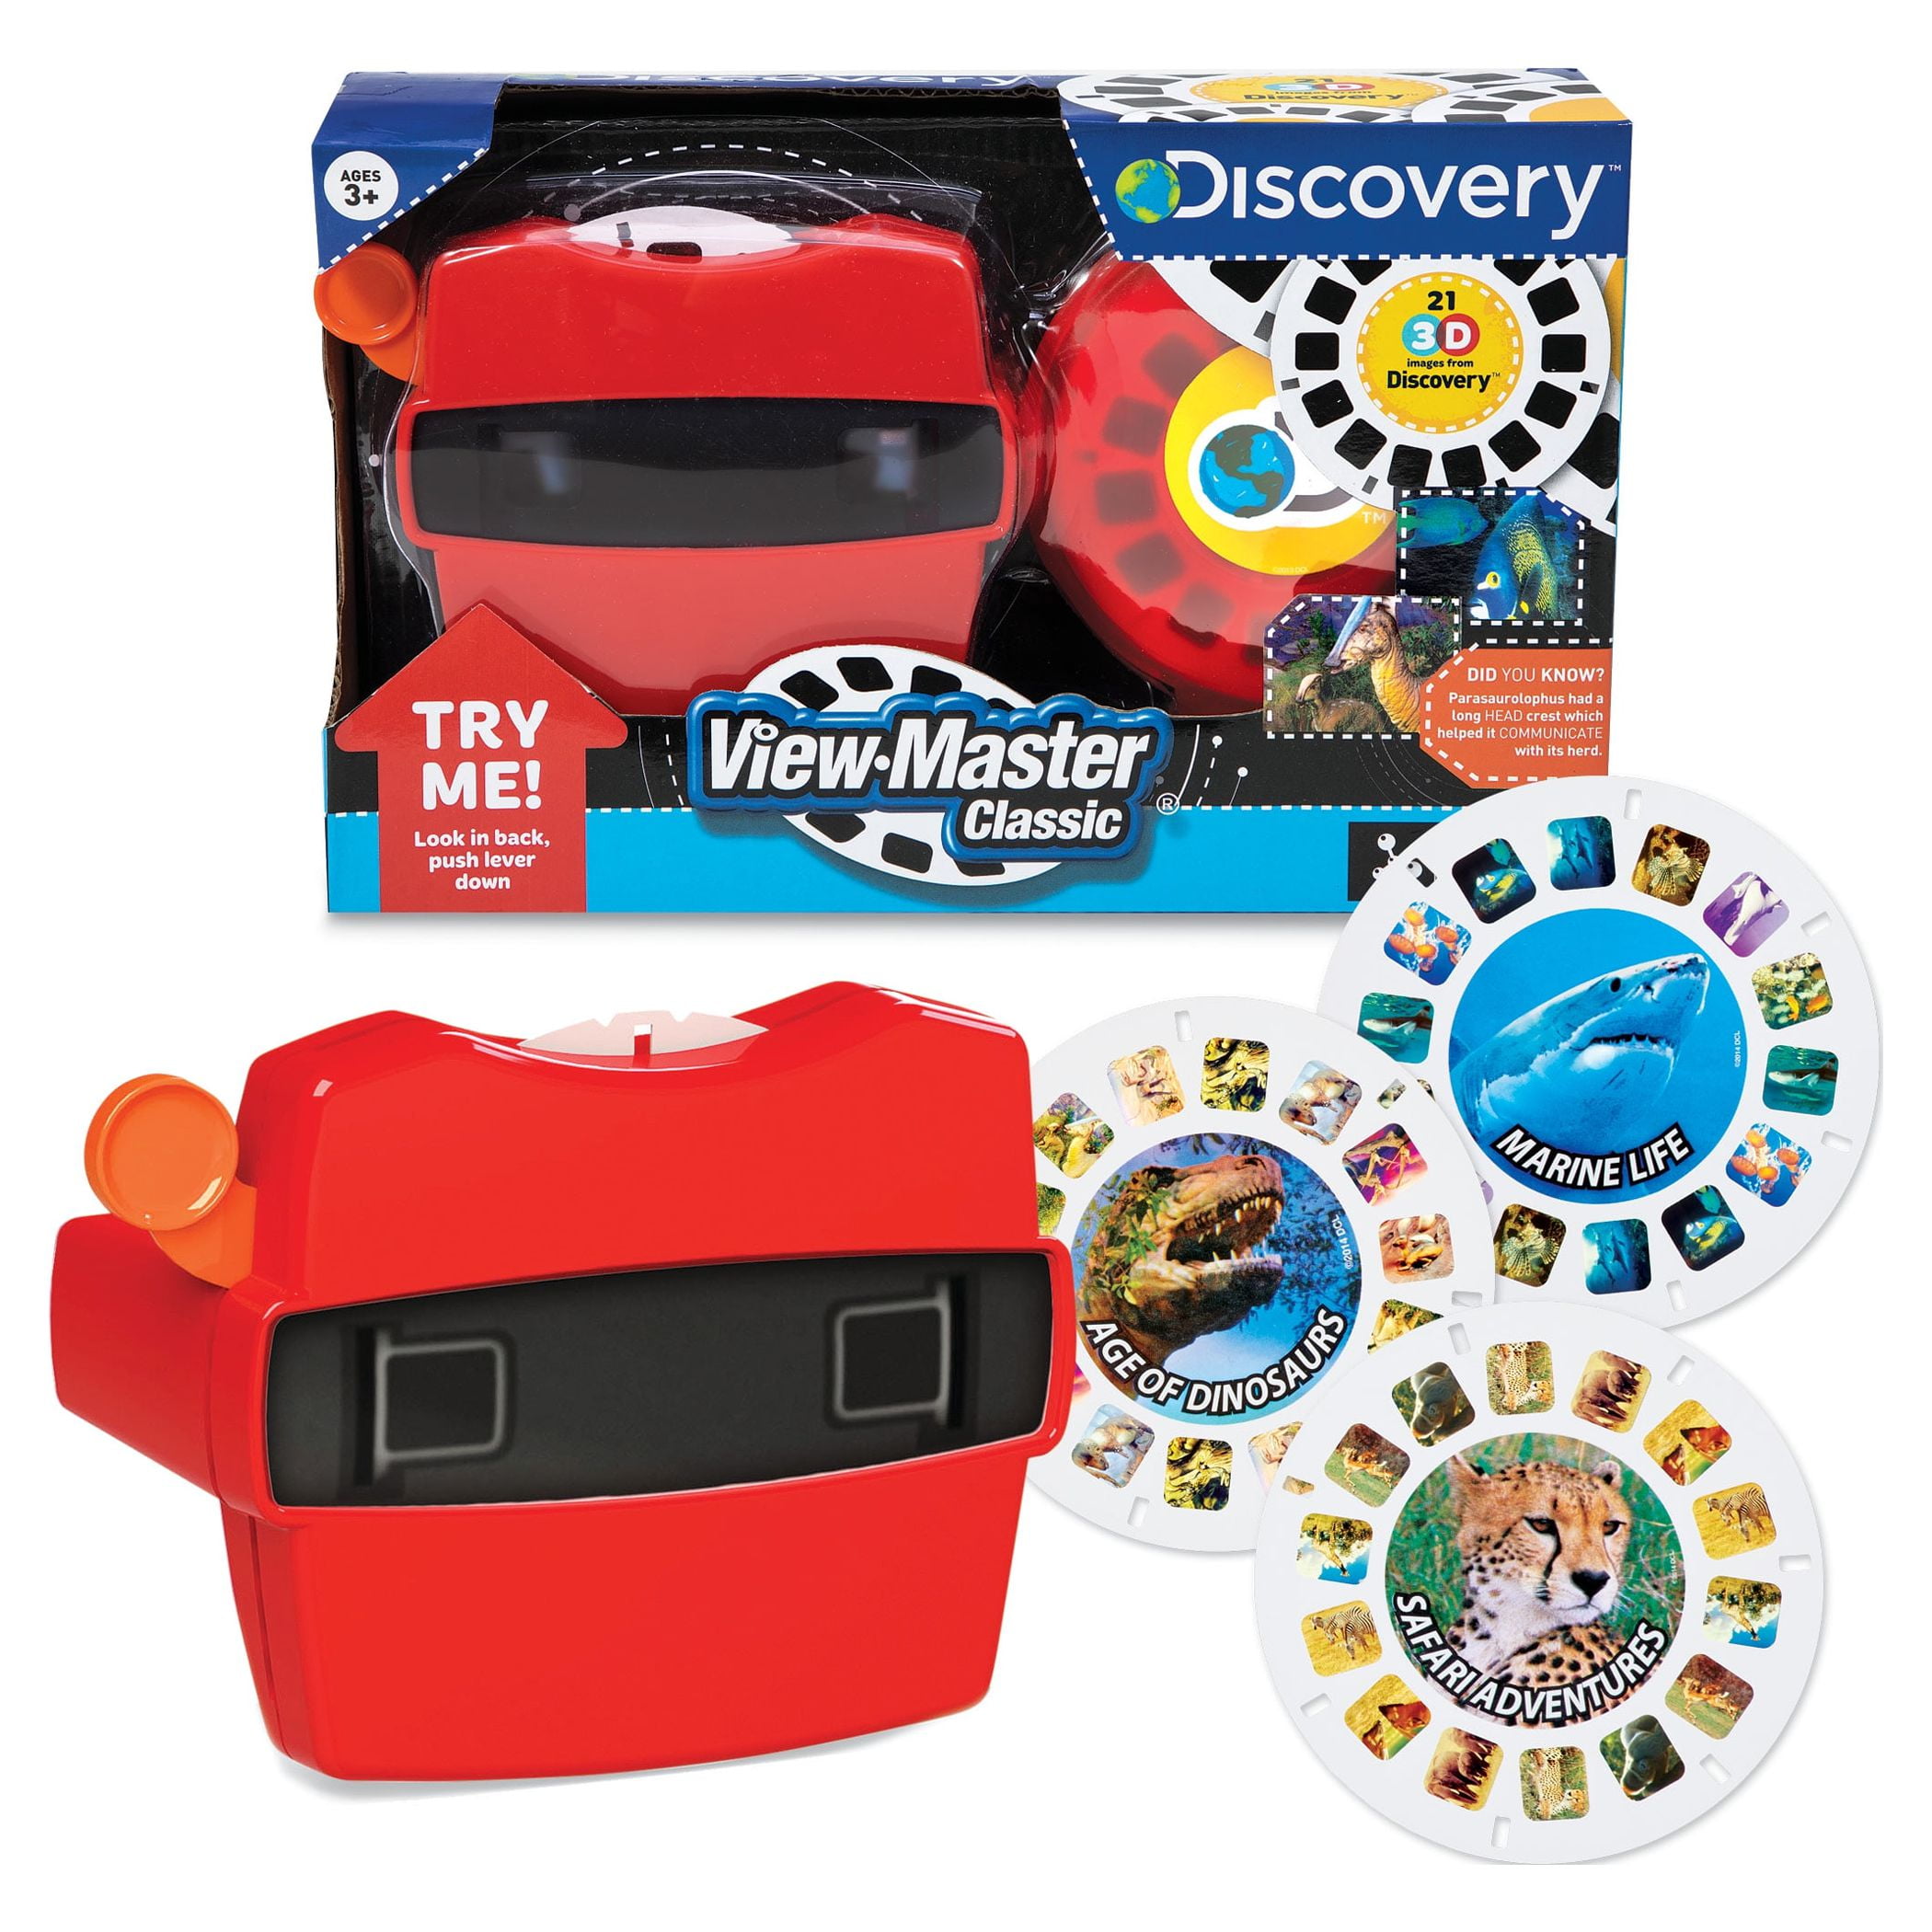 Big Game Toys 3D View Master Discovery Kids Dinosaurs Marine Animals  Viewmaster Viewer Box Set 